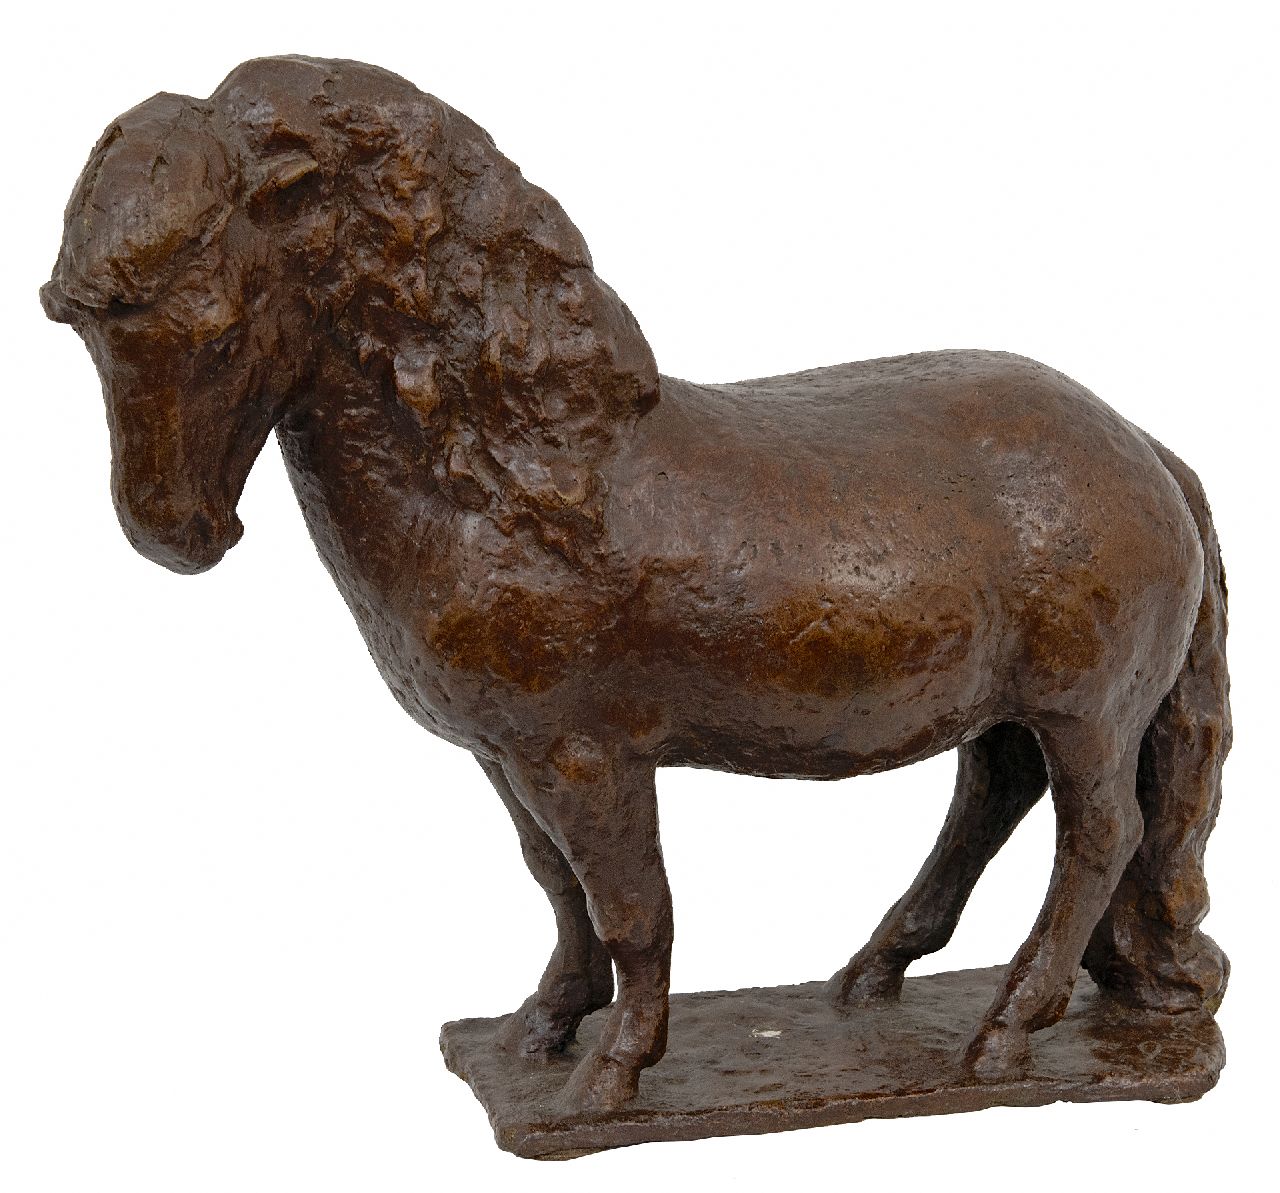 Rädecker J.  | Johan 'Han' Rädecker | Sculptures and objects offered for sale | Horse, bronze 27.0 x 30.0 cm, signed on the base with monogram